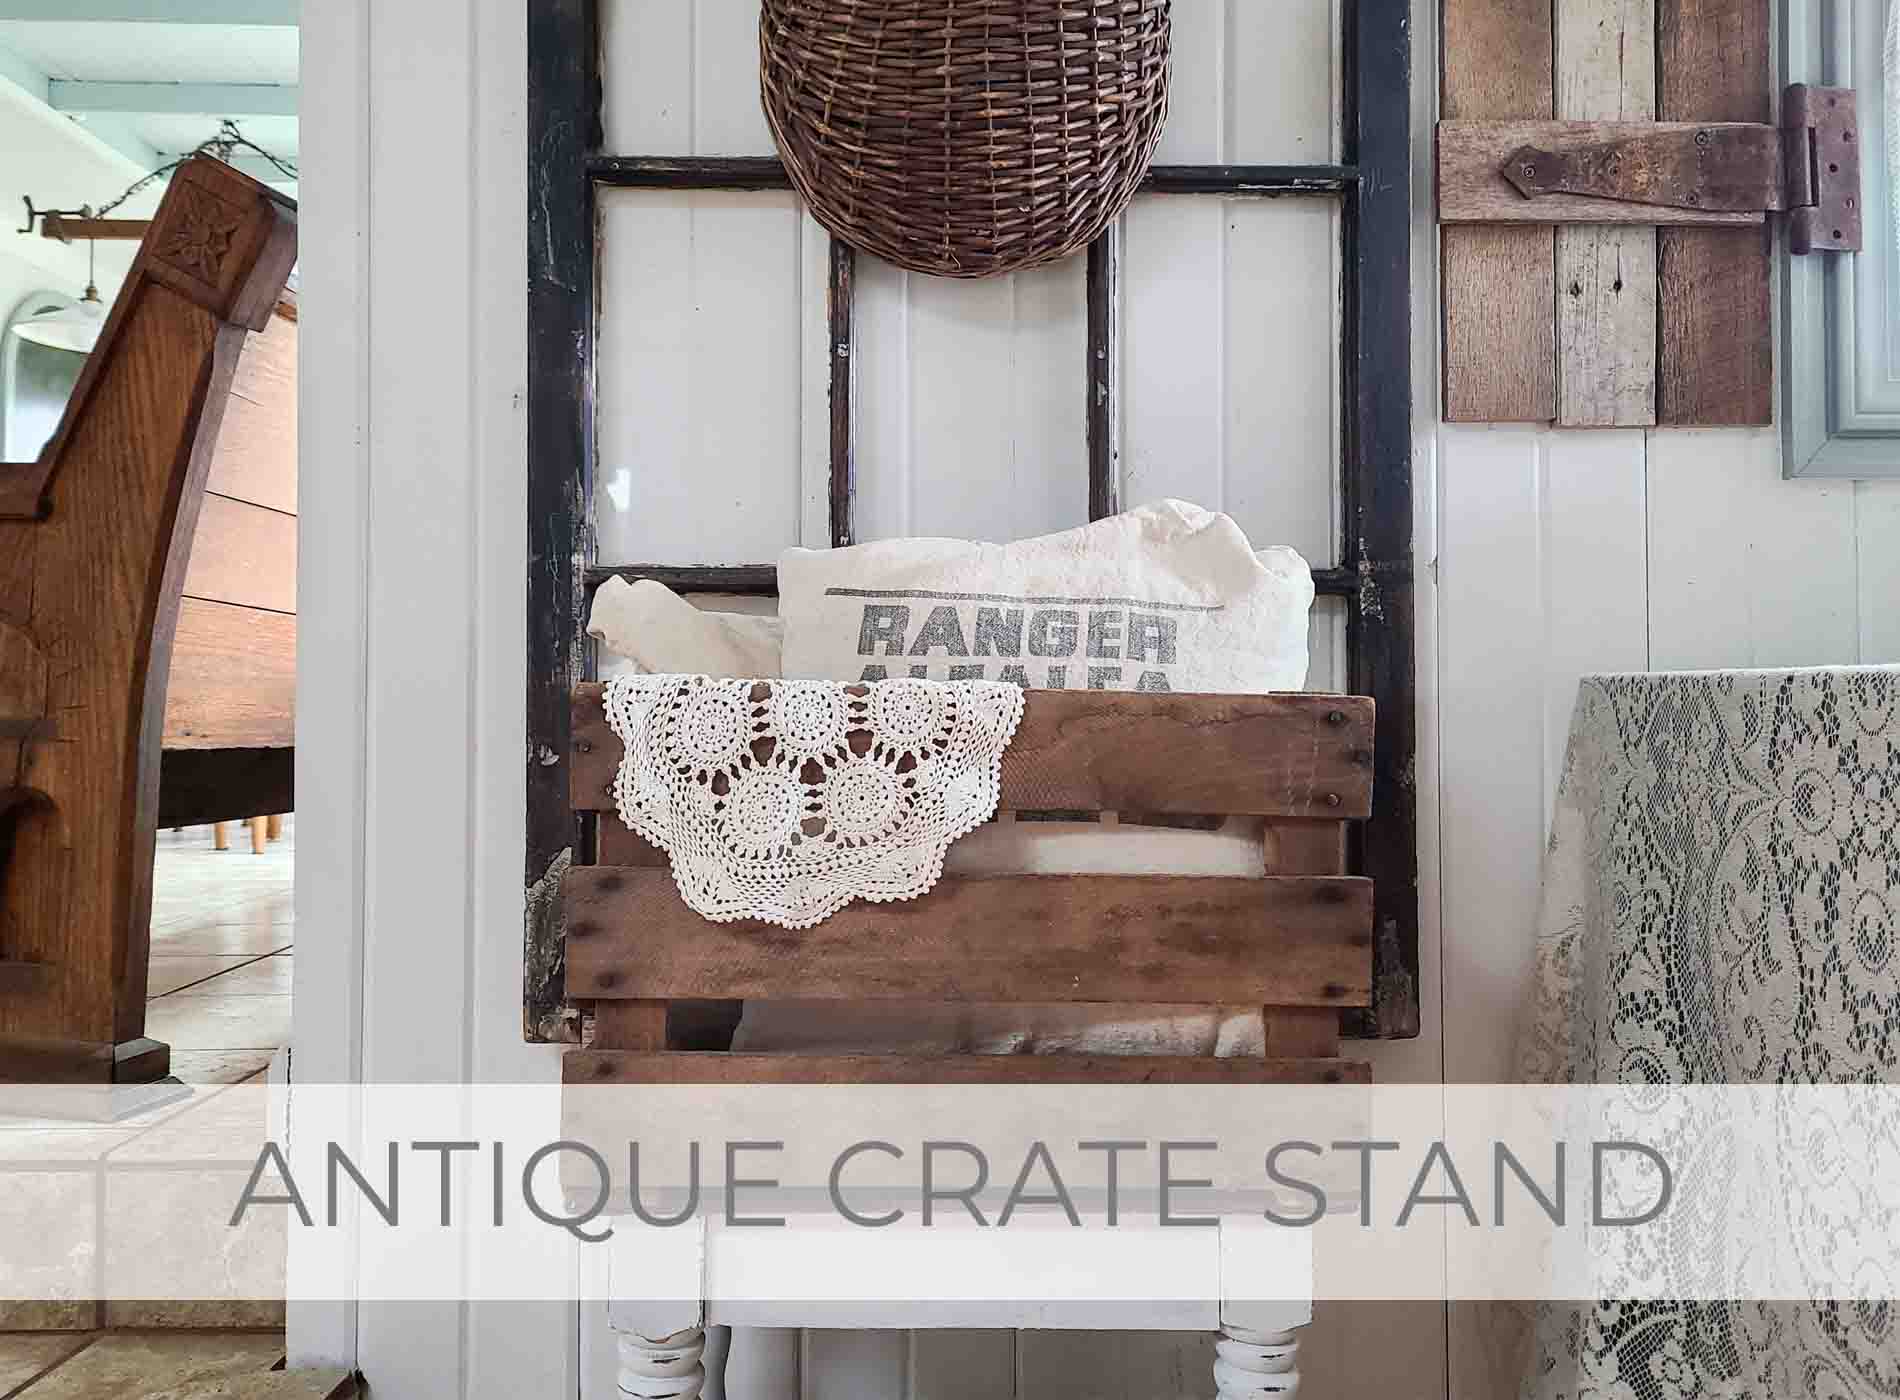 Showcase of Antique Crate Stand Built from Reclaimed Materials by Larissa of Prodigal Pieces | prodigalpieces.com #prodigalpieces